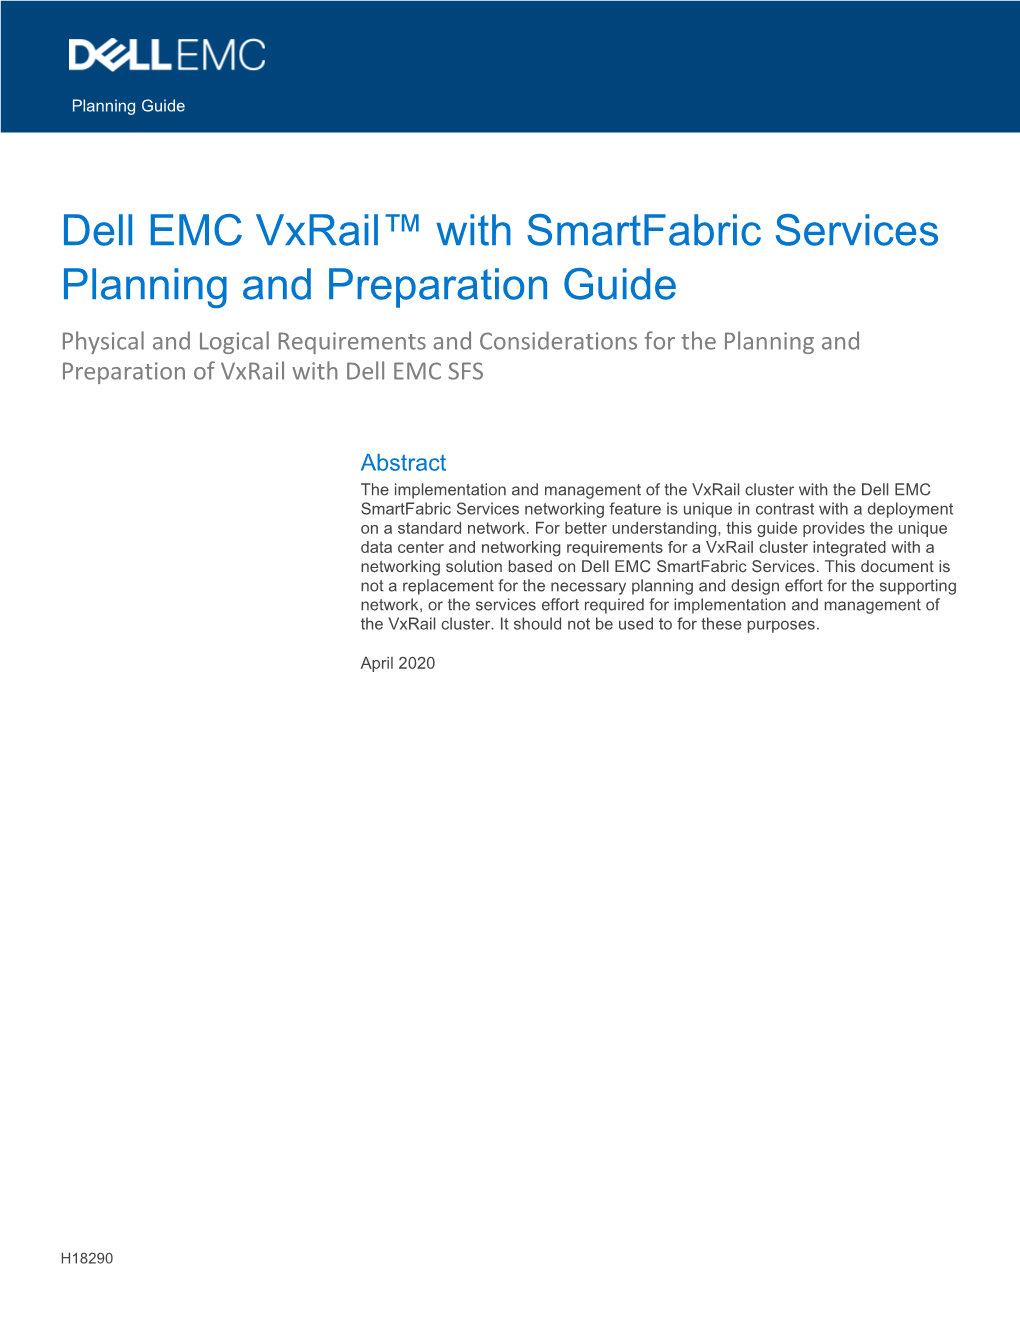 Dell EMC Vxrail with Smartfabric Services Planning and Preparation